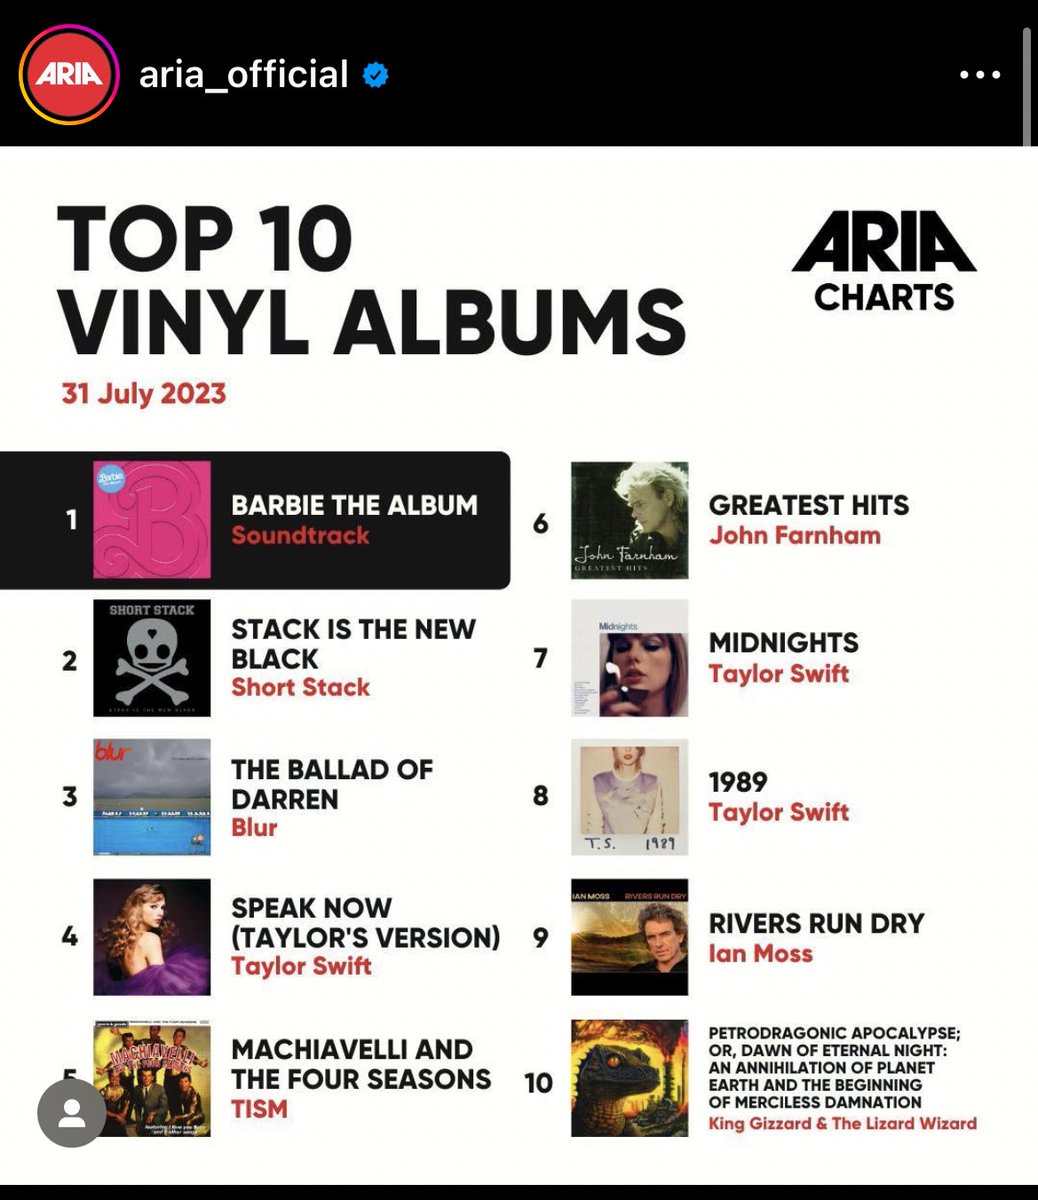 Tism are in the @ARIA_Official charts